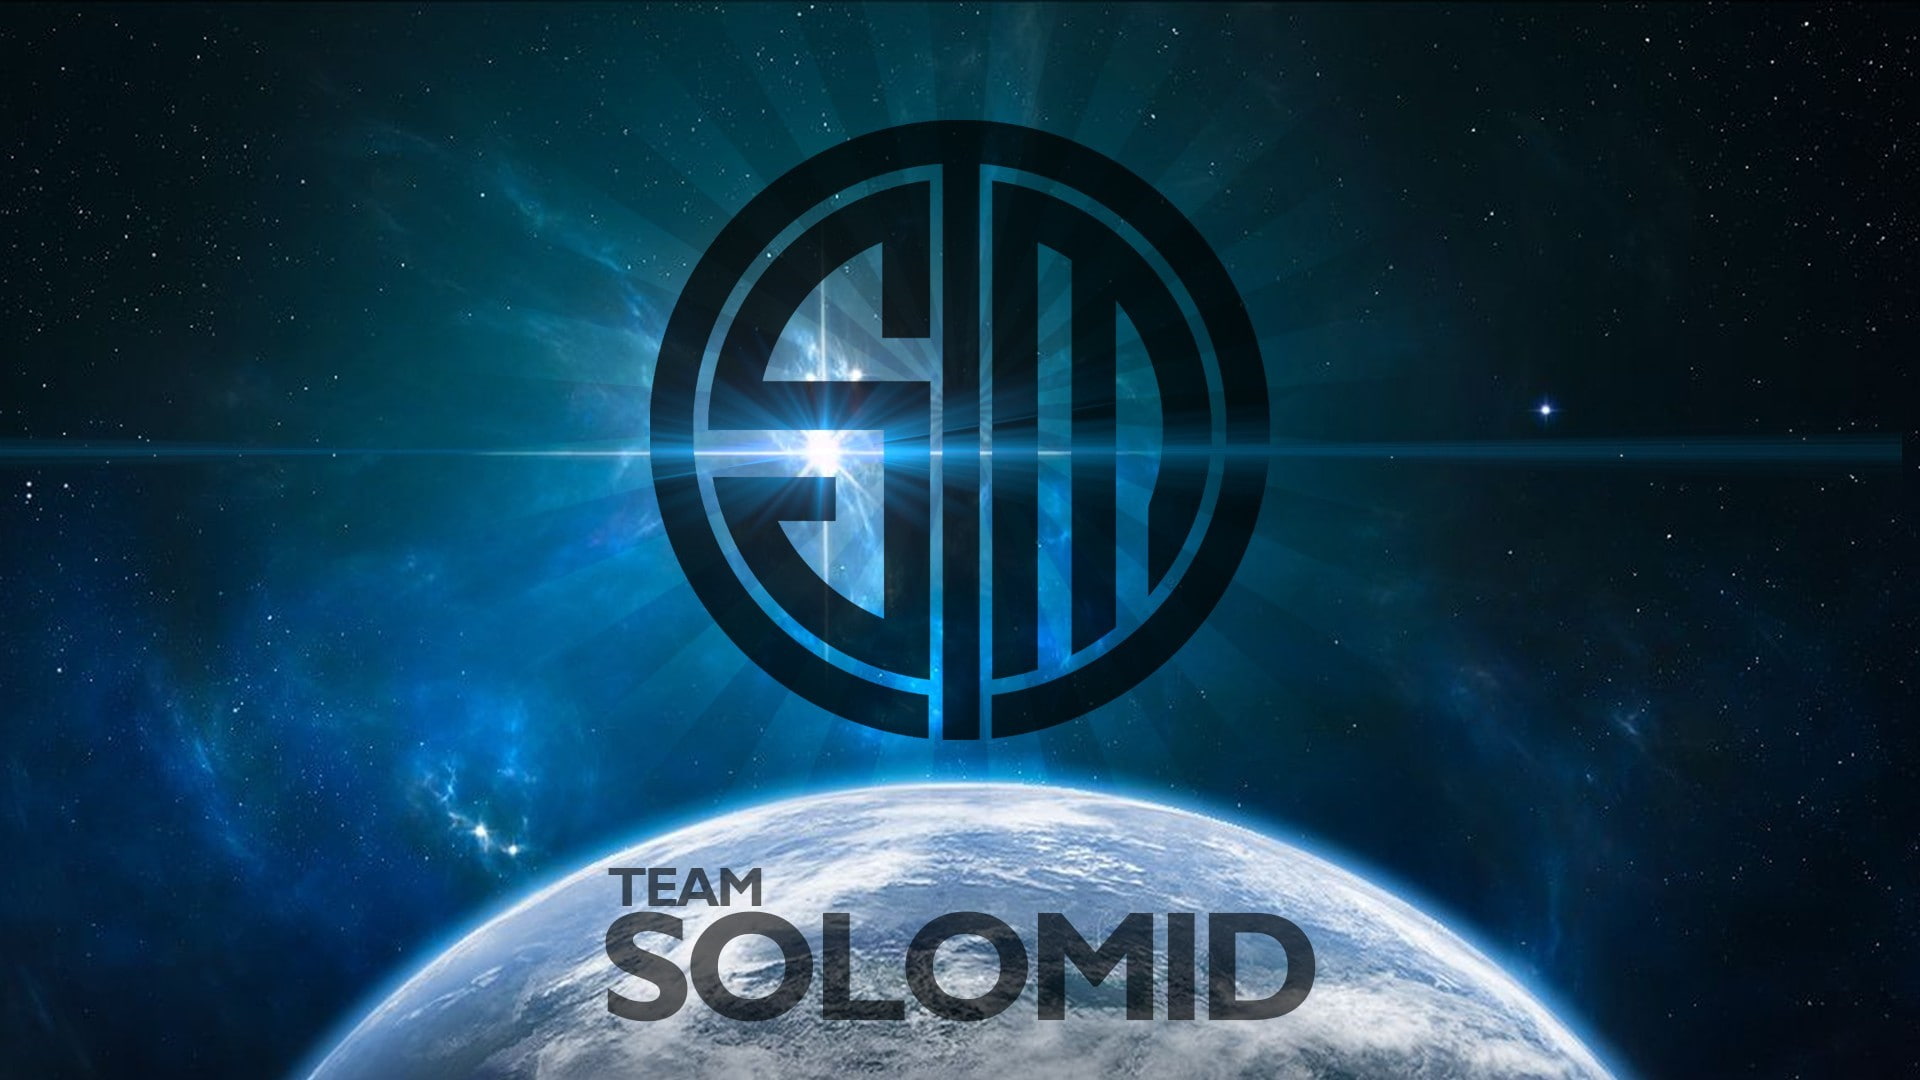 team solomid league of legends esports, star - space, night